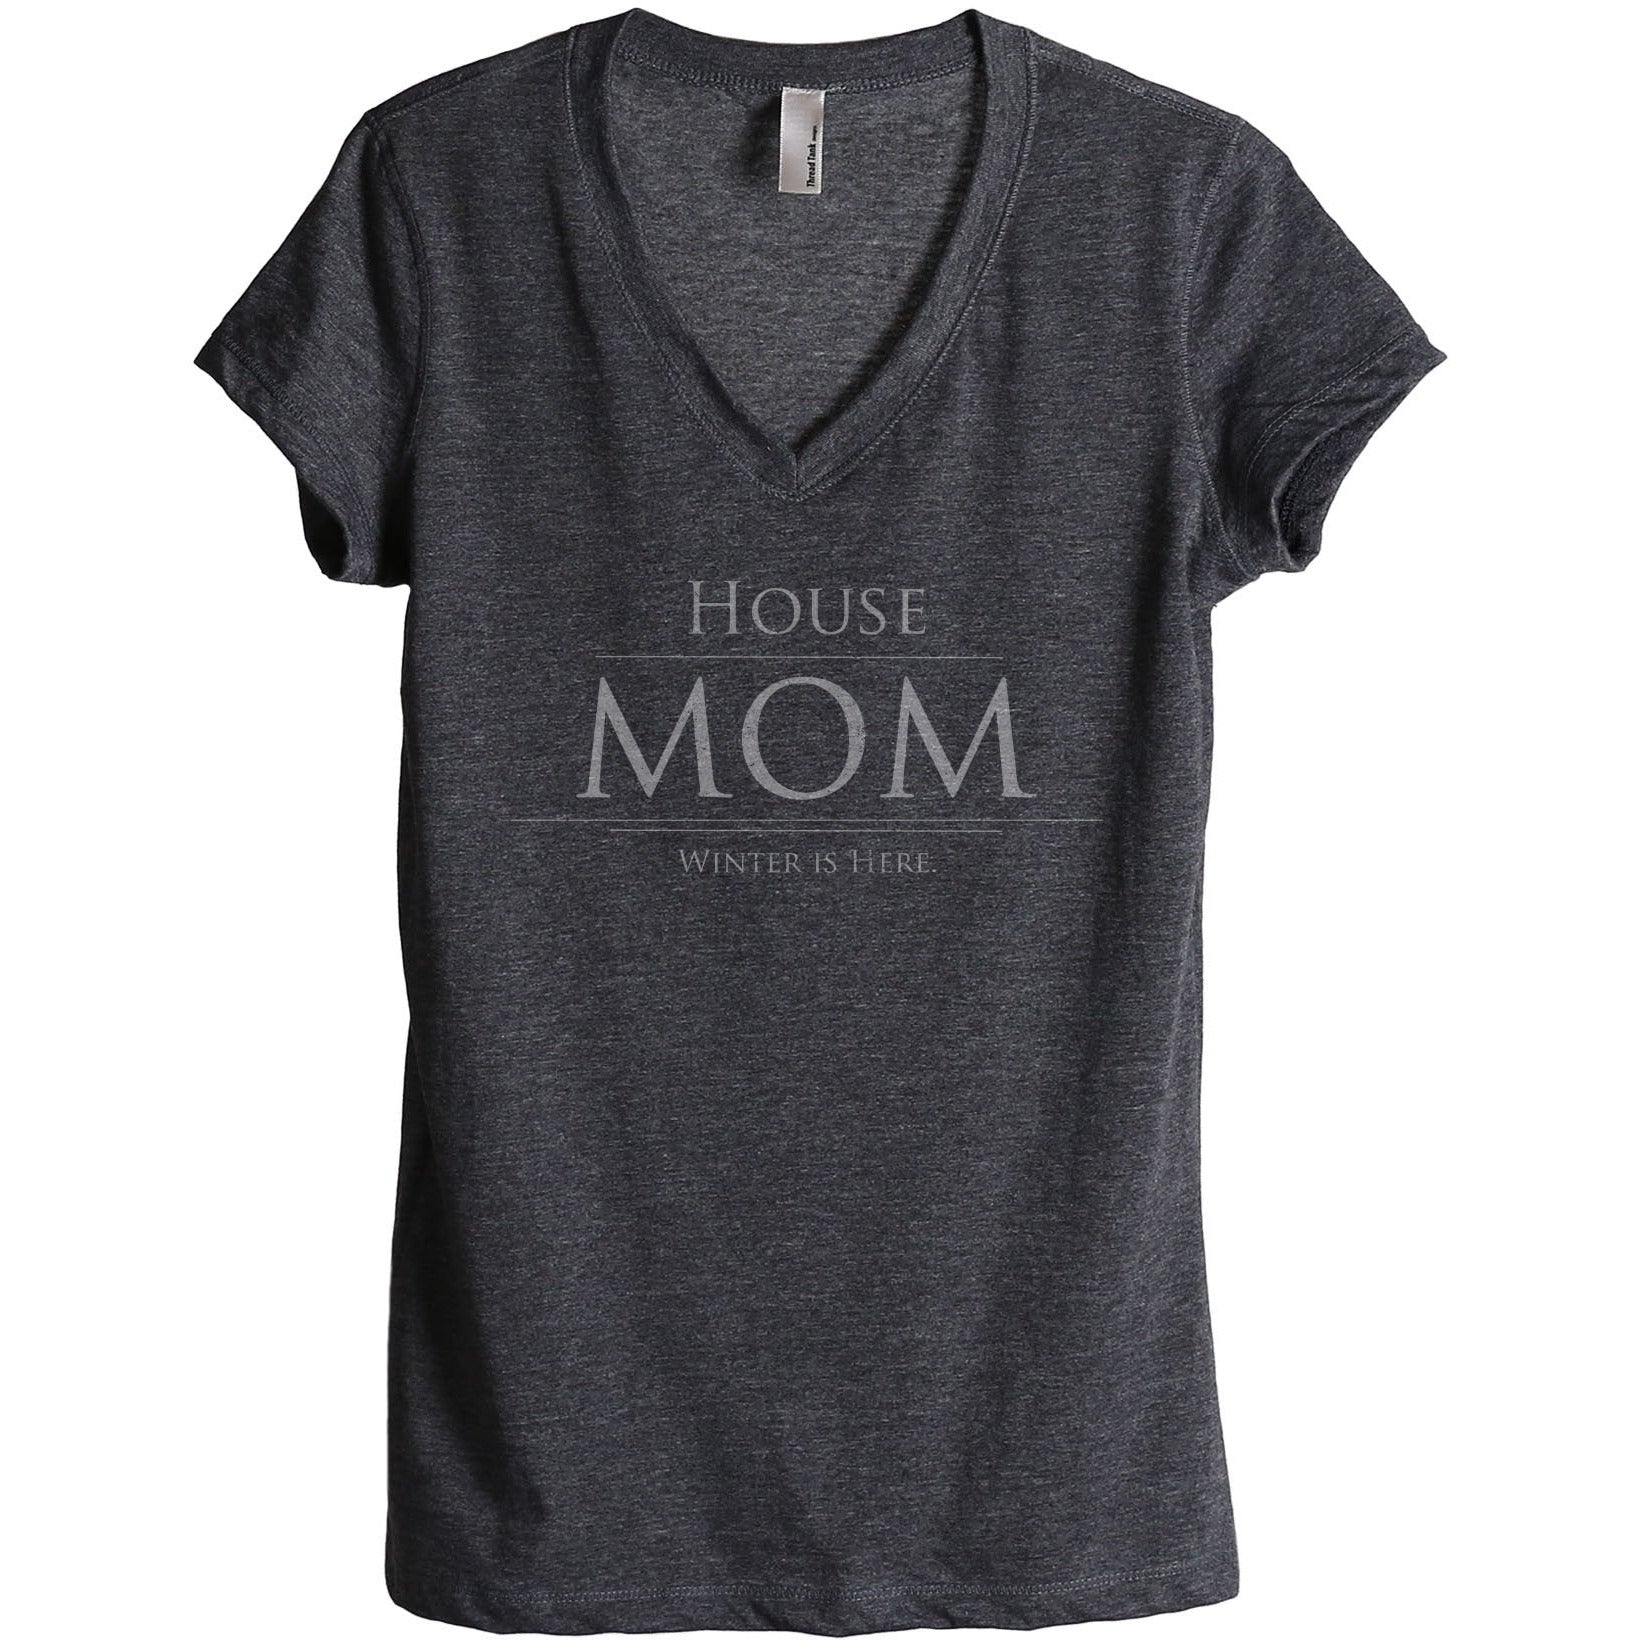 House Mom Winter Is Here Women's Relaxed V-Neck T-Shirt Tee Charcoal